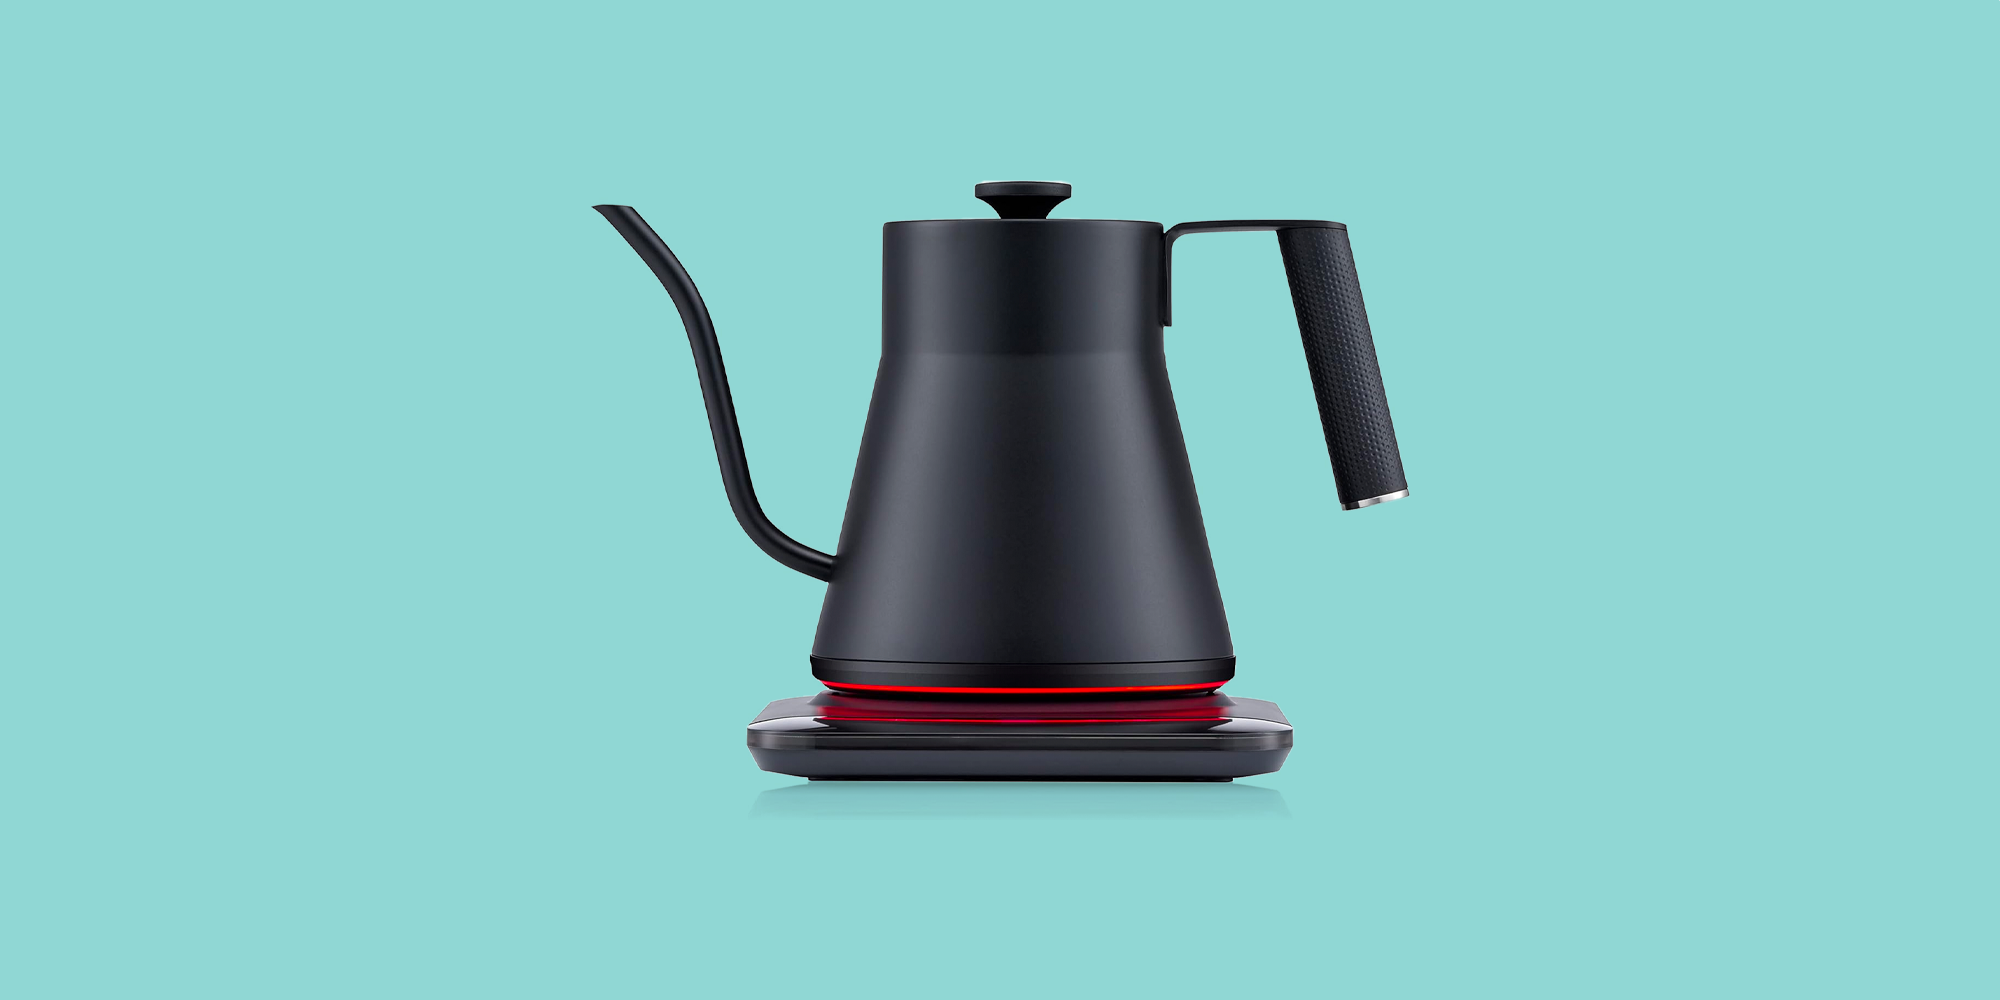 GOLD Electric Gooseneck Kettle with Temperature Controller MULTIFUNCTION  ELECTRIC VARIABLE GOOSENECK KETTLE - AliExpress